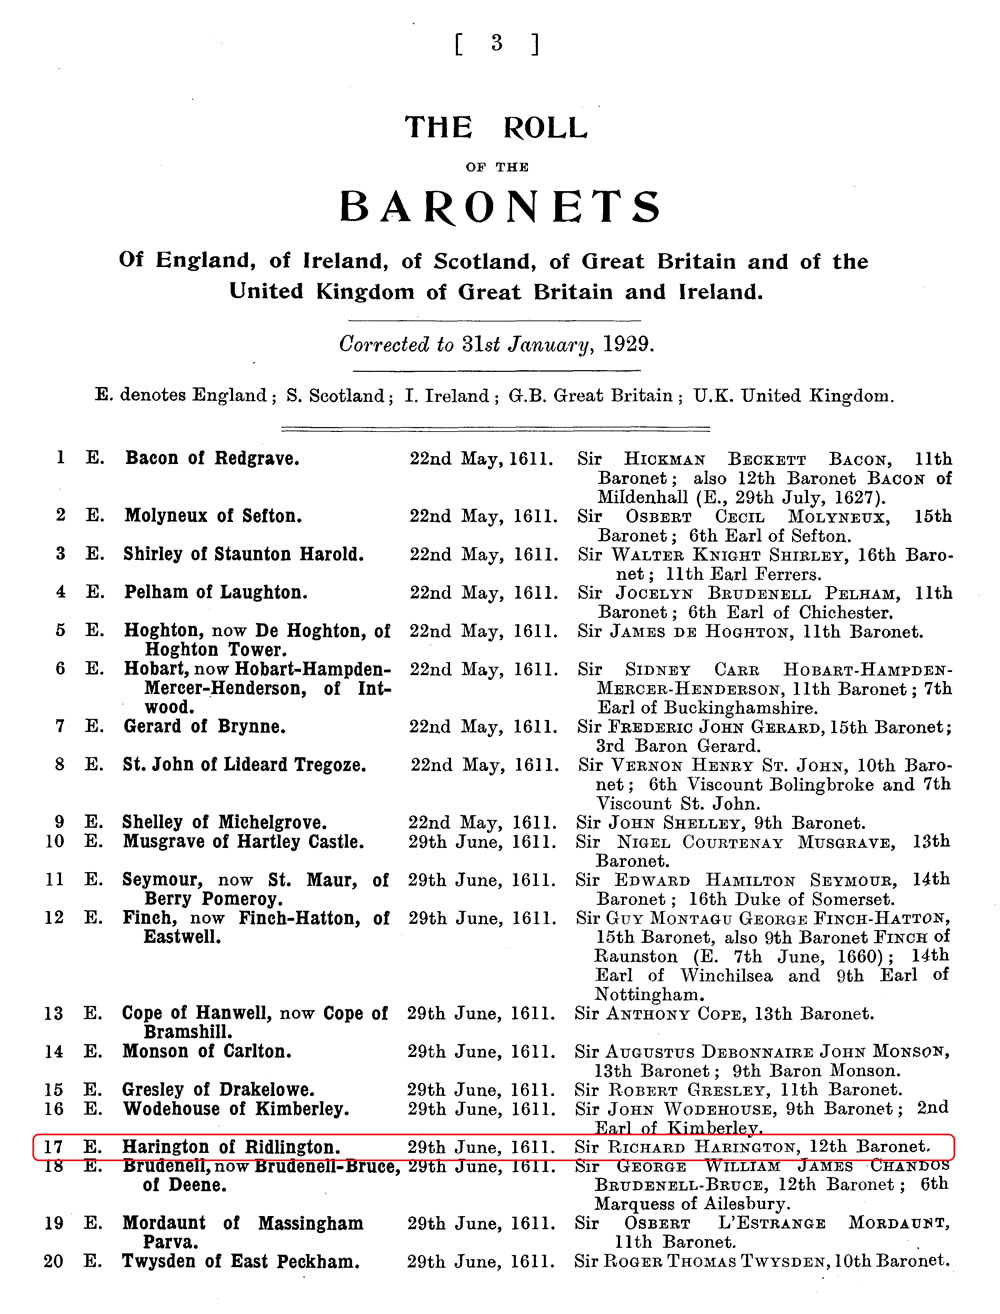 The Roll of the Baronets 1929 from TheGenealogist